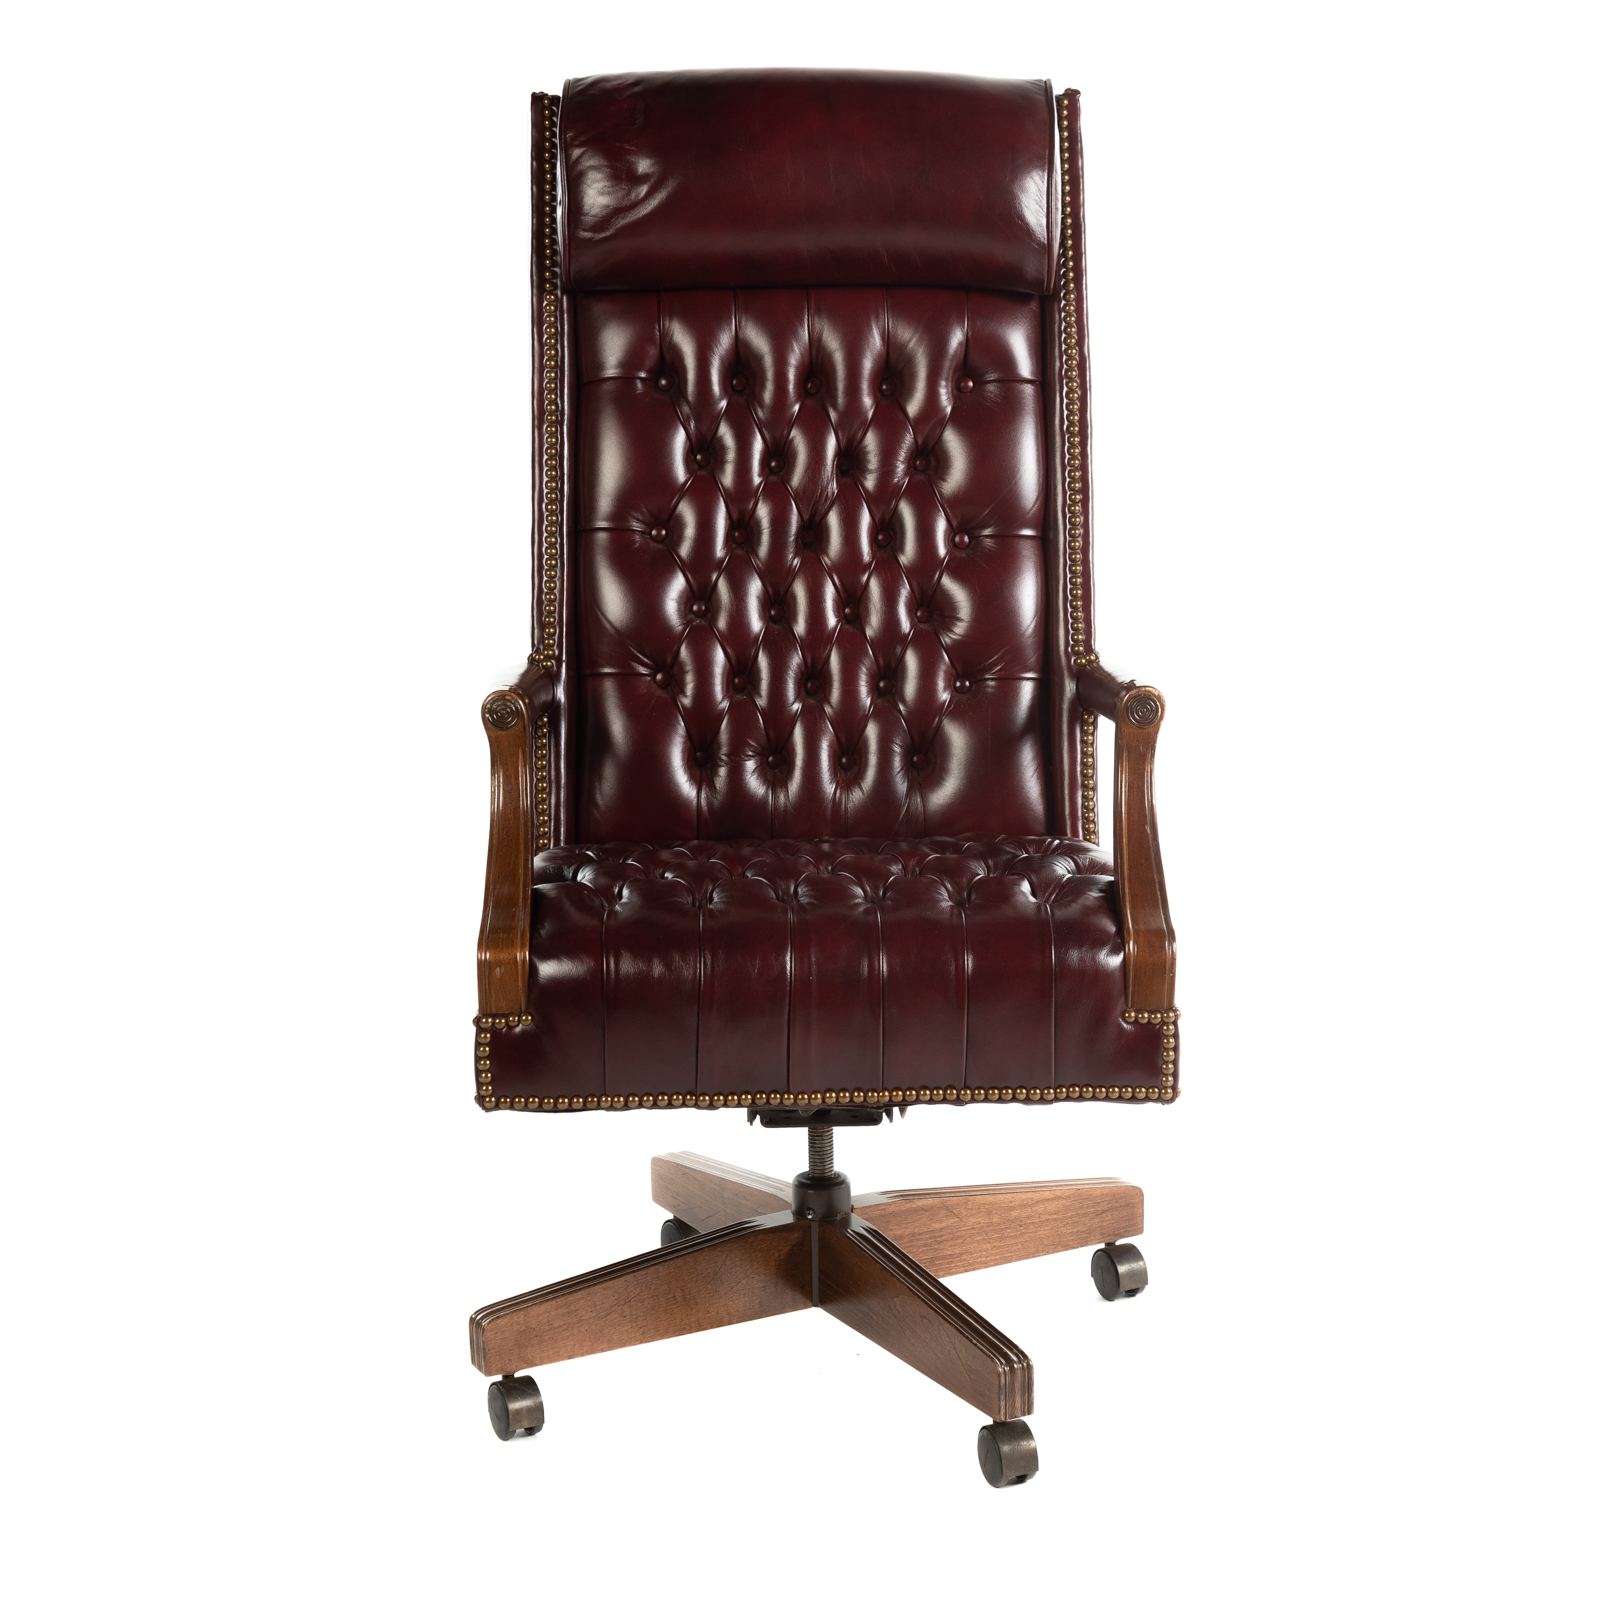 HICKORY CHAIR BURGUNDY LEATHER